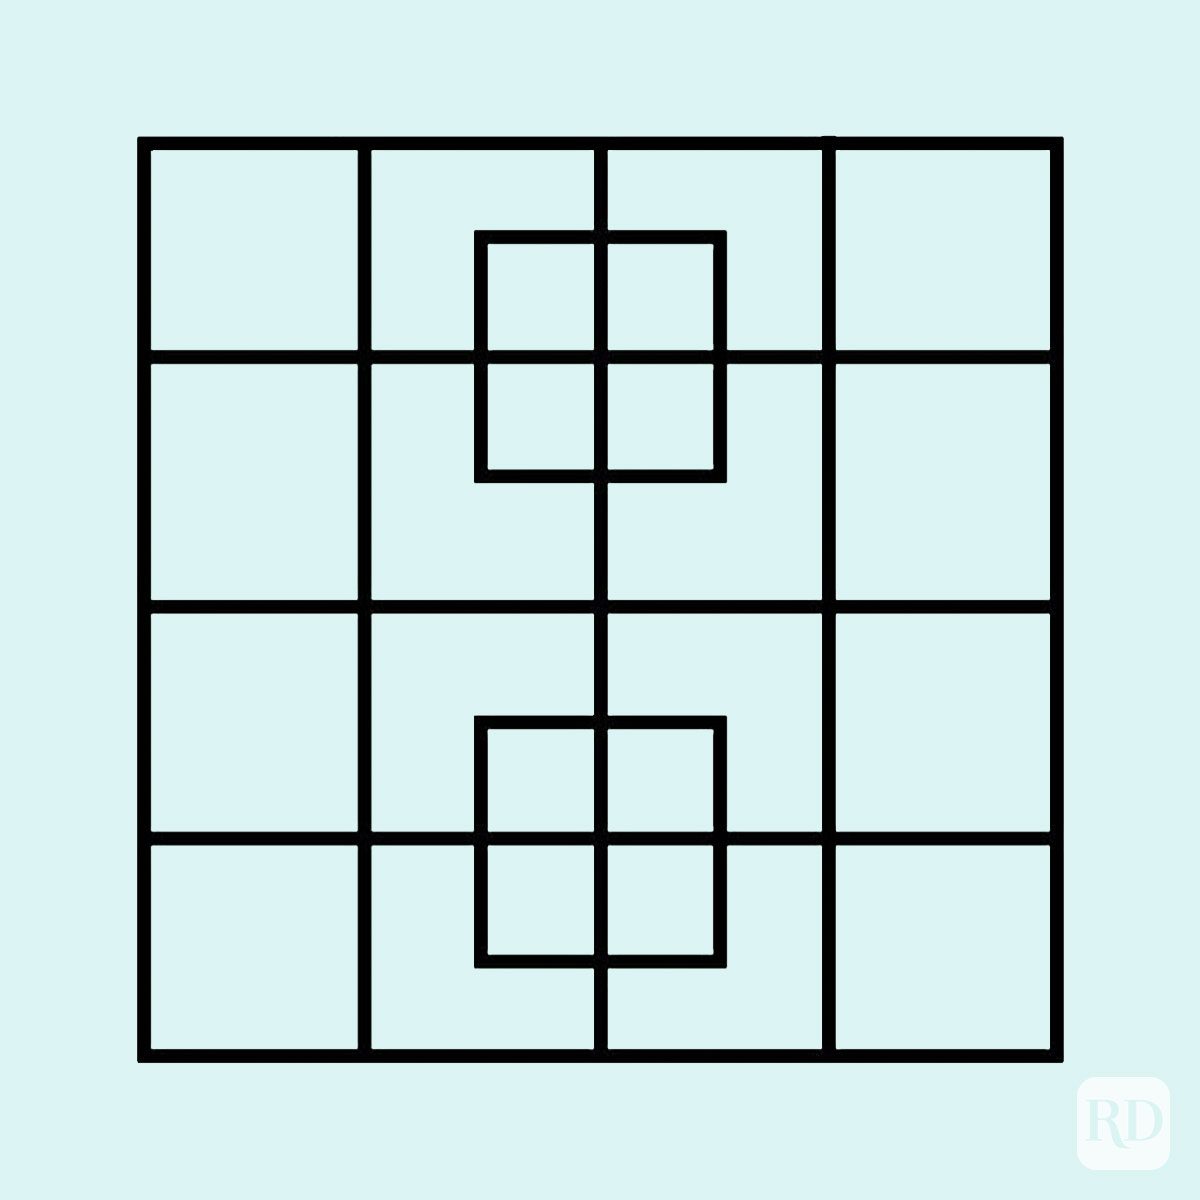 14 Visual Brain Teasers And Puzzles That Will Leave You Stumped How Many Squares Do You See In This Puzzle Graphic